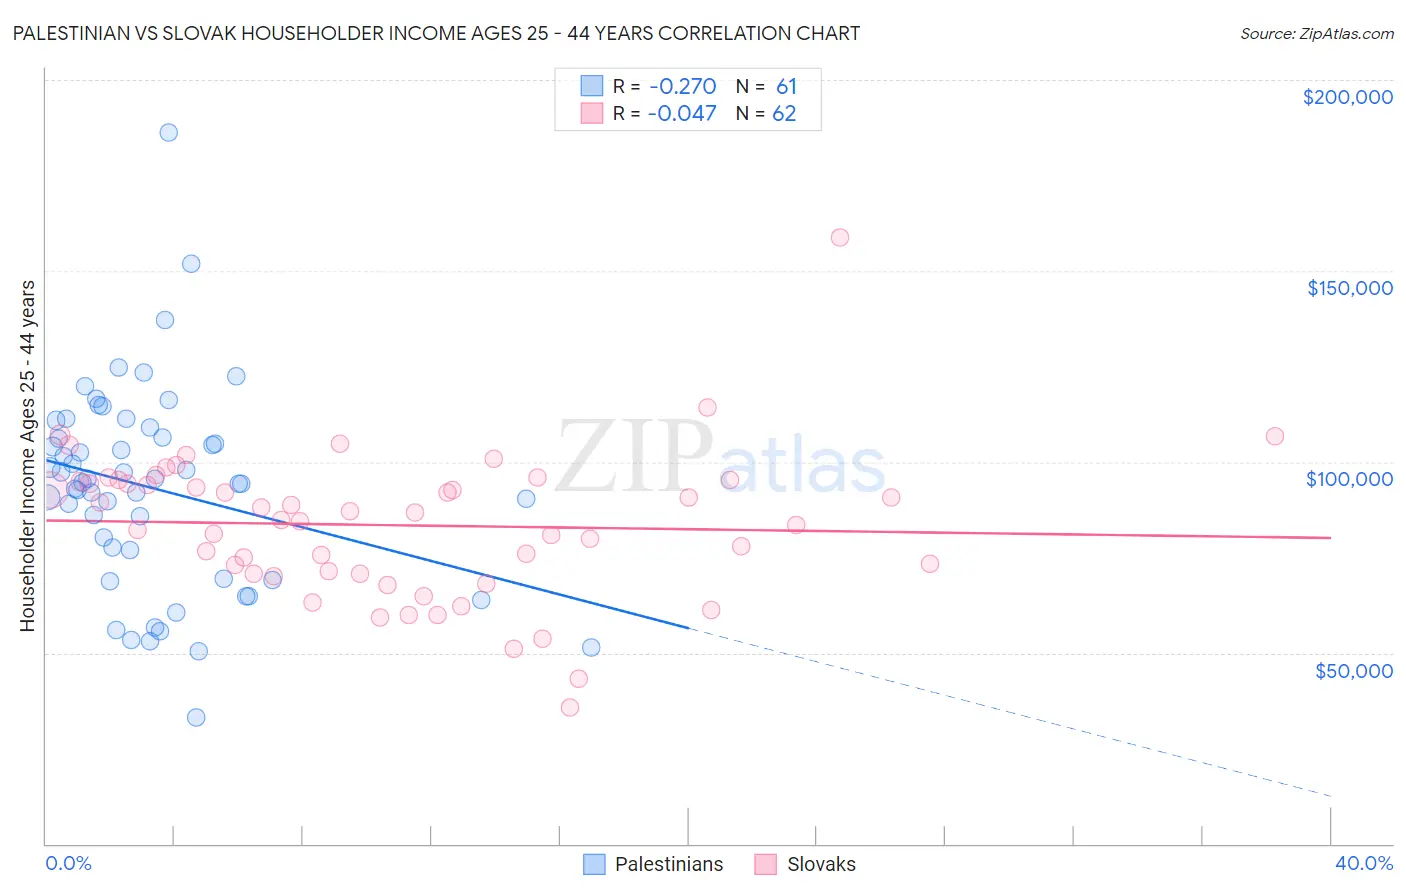 Palestinian vs Slovak Householder Income Ages 25 - 44 years